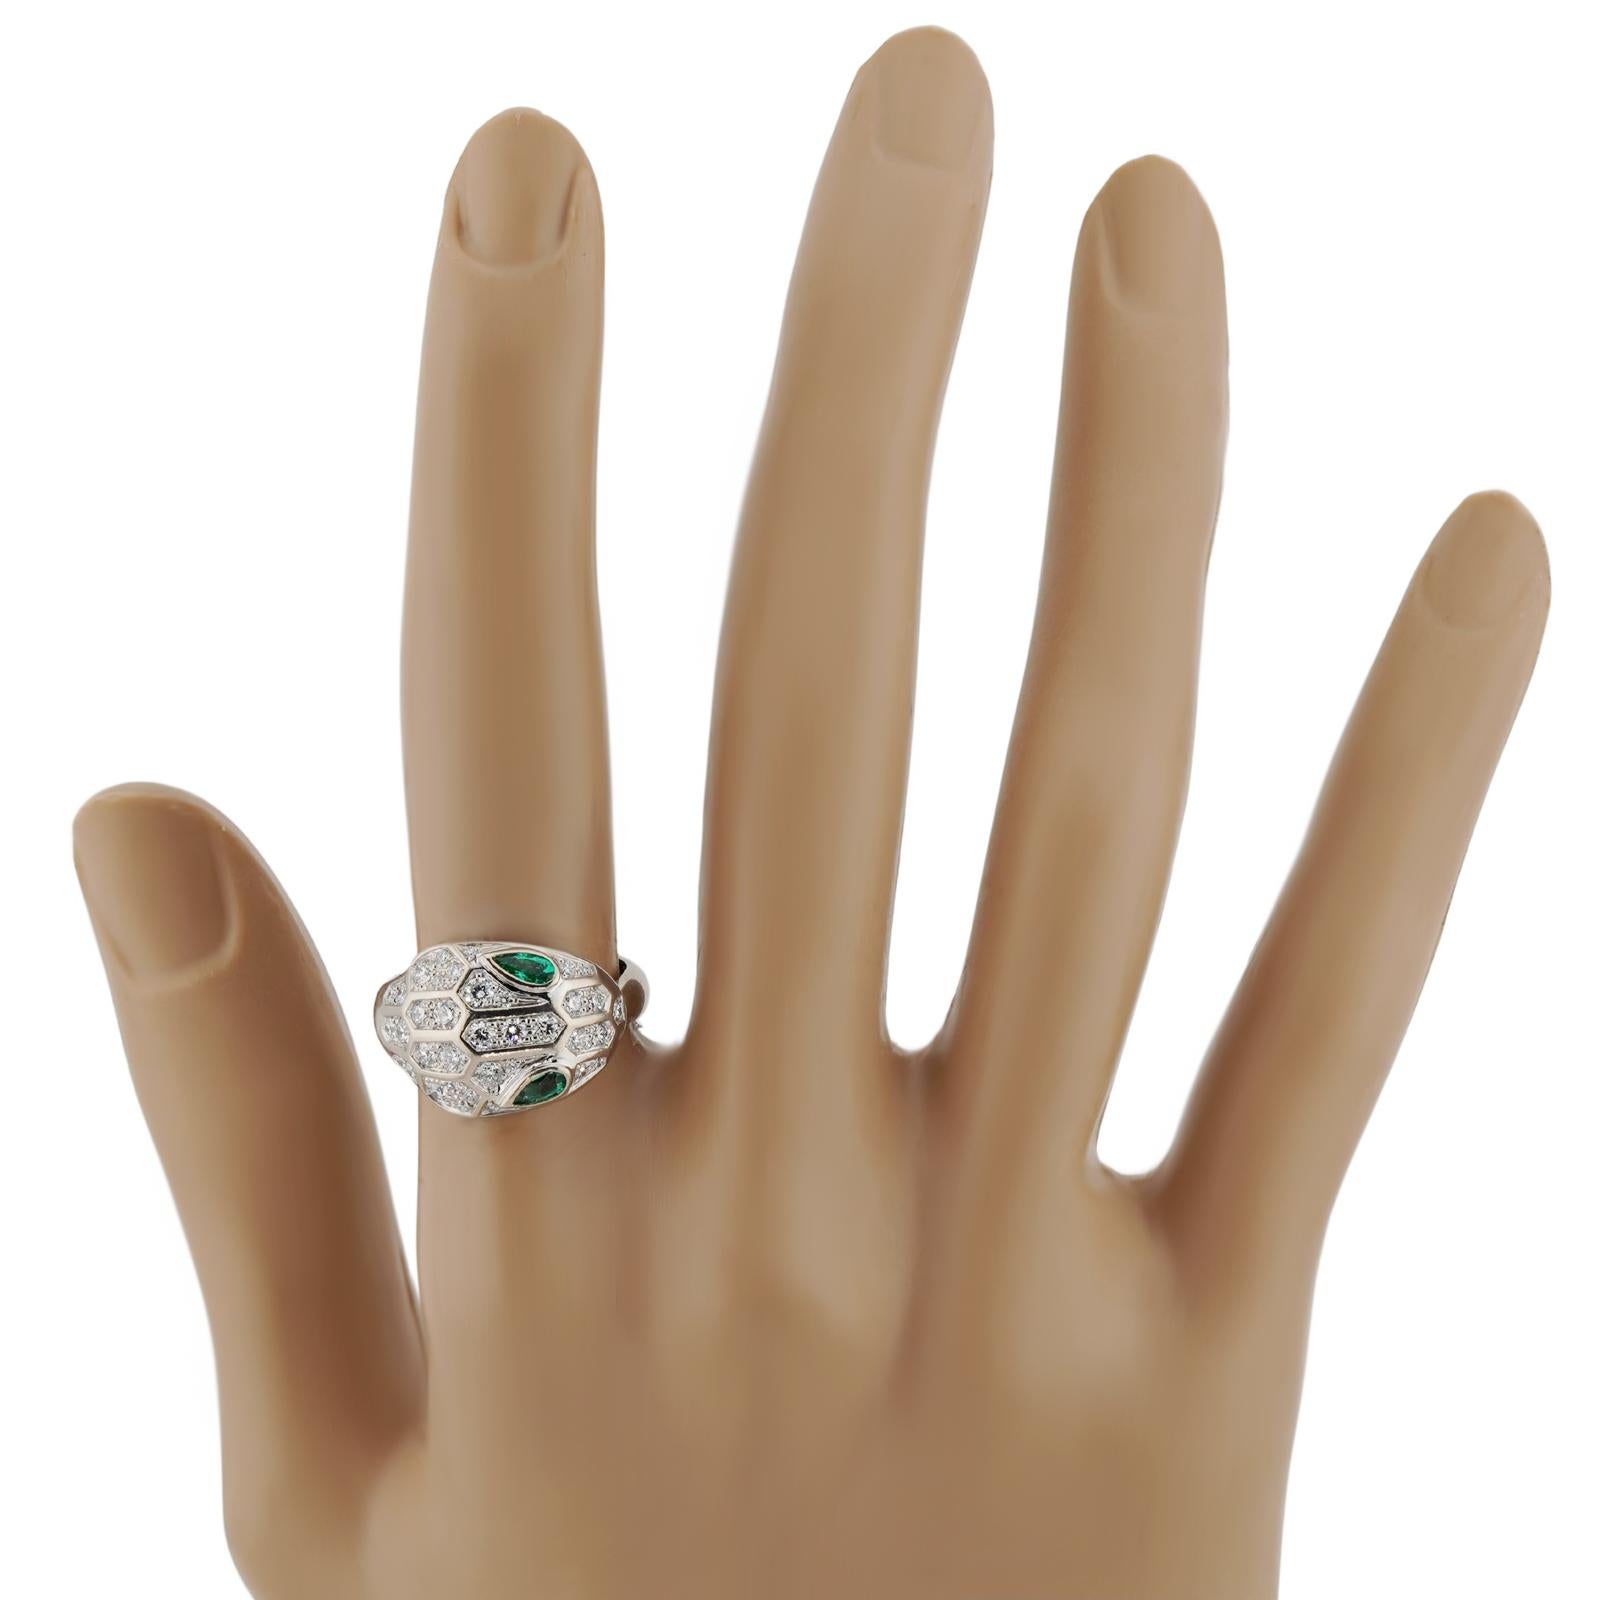 This exquisite authentic Bvlgari ring from the iconic Serpenti Seduttori collection is crafted in 18k white gold and set with a pair of pear-cut green emeralds and round brilliant E-F-G VVS2-VS1 diamonds. Made in Italy circa 2020s. Measurements: